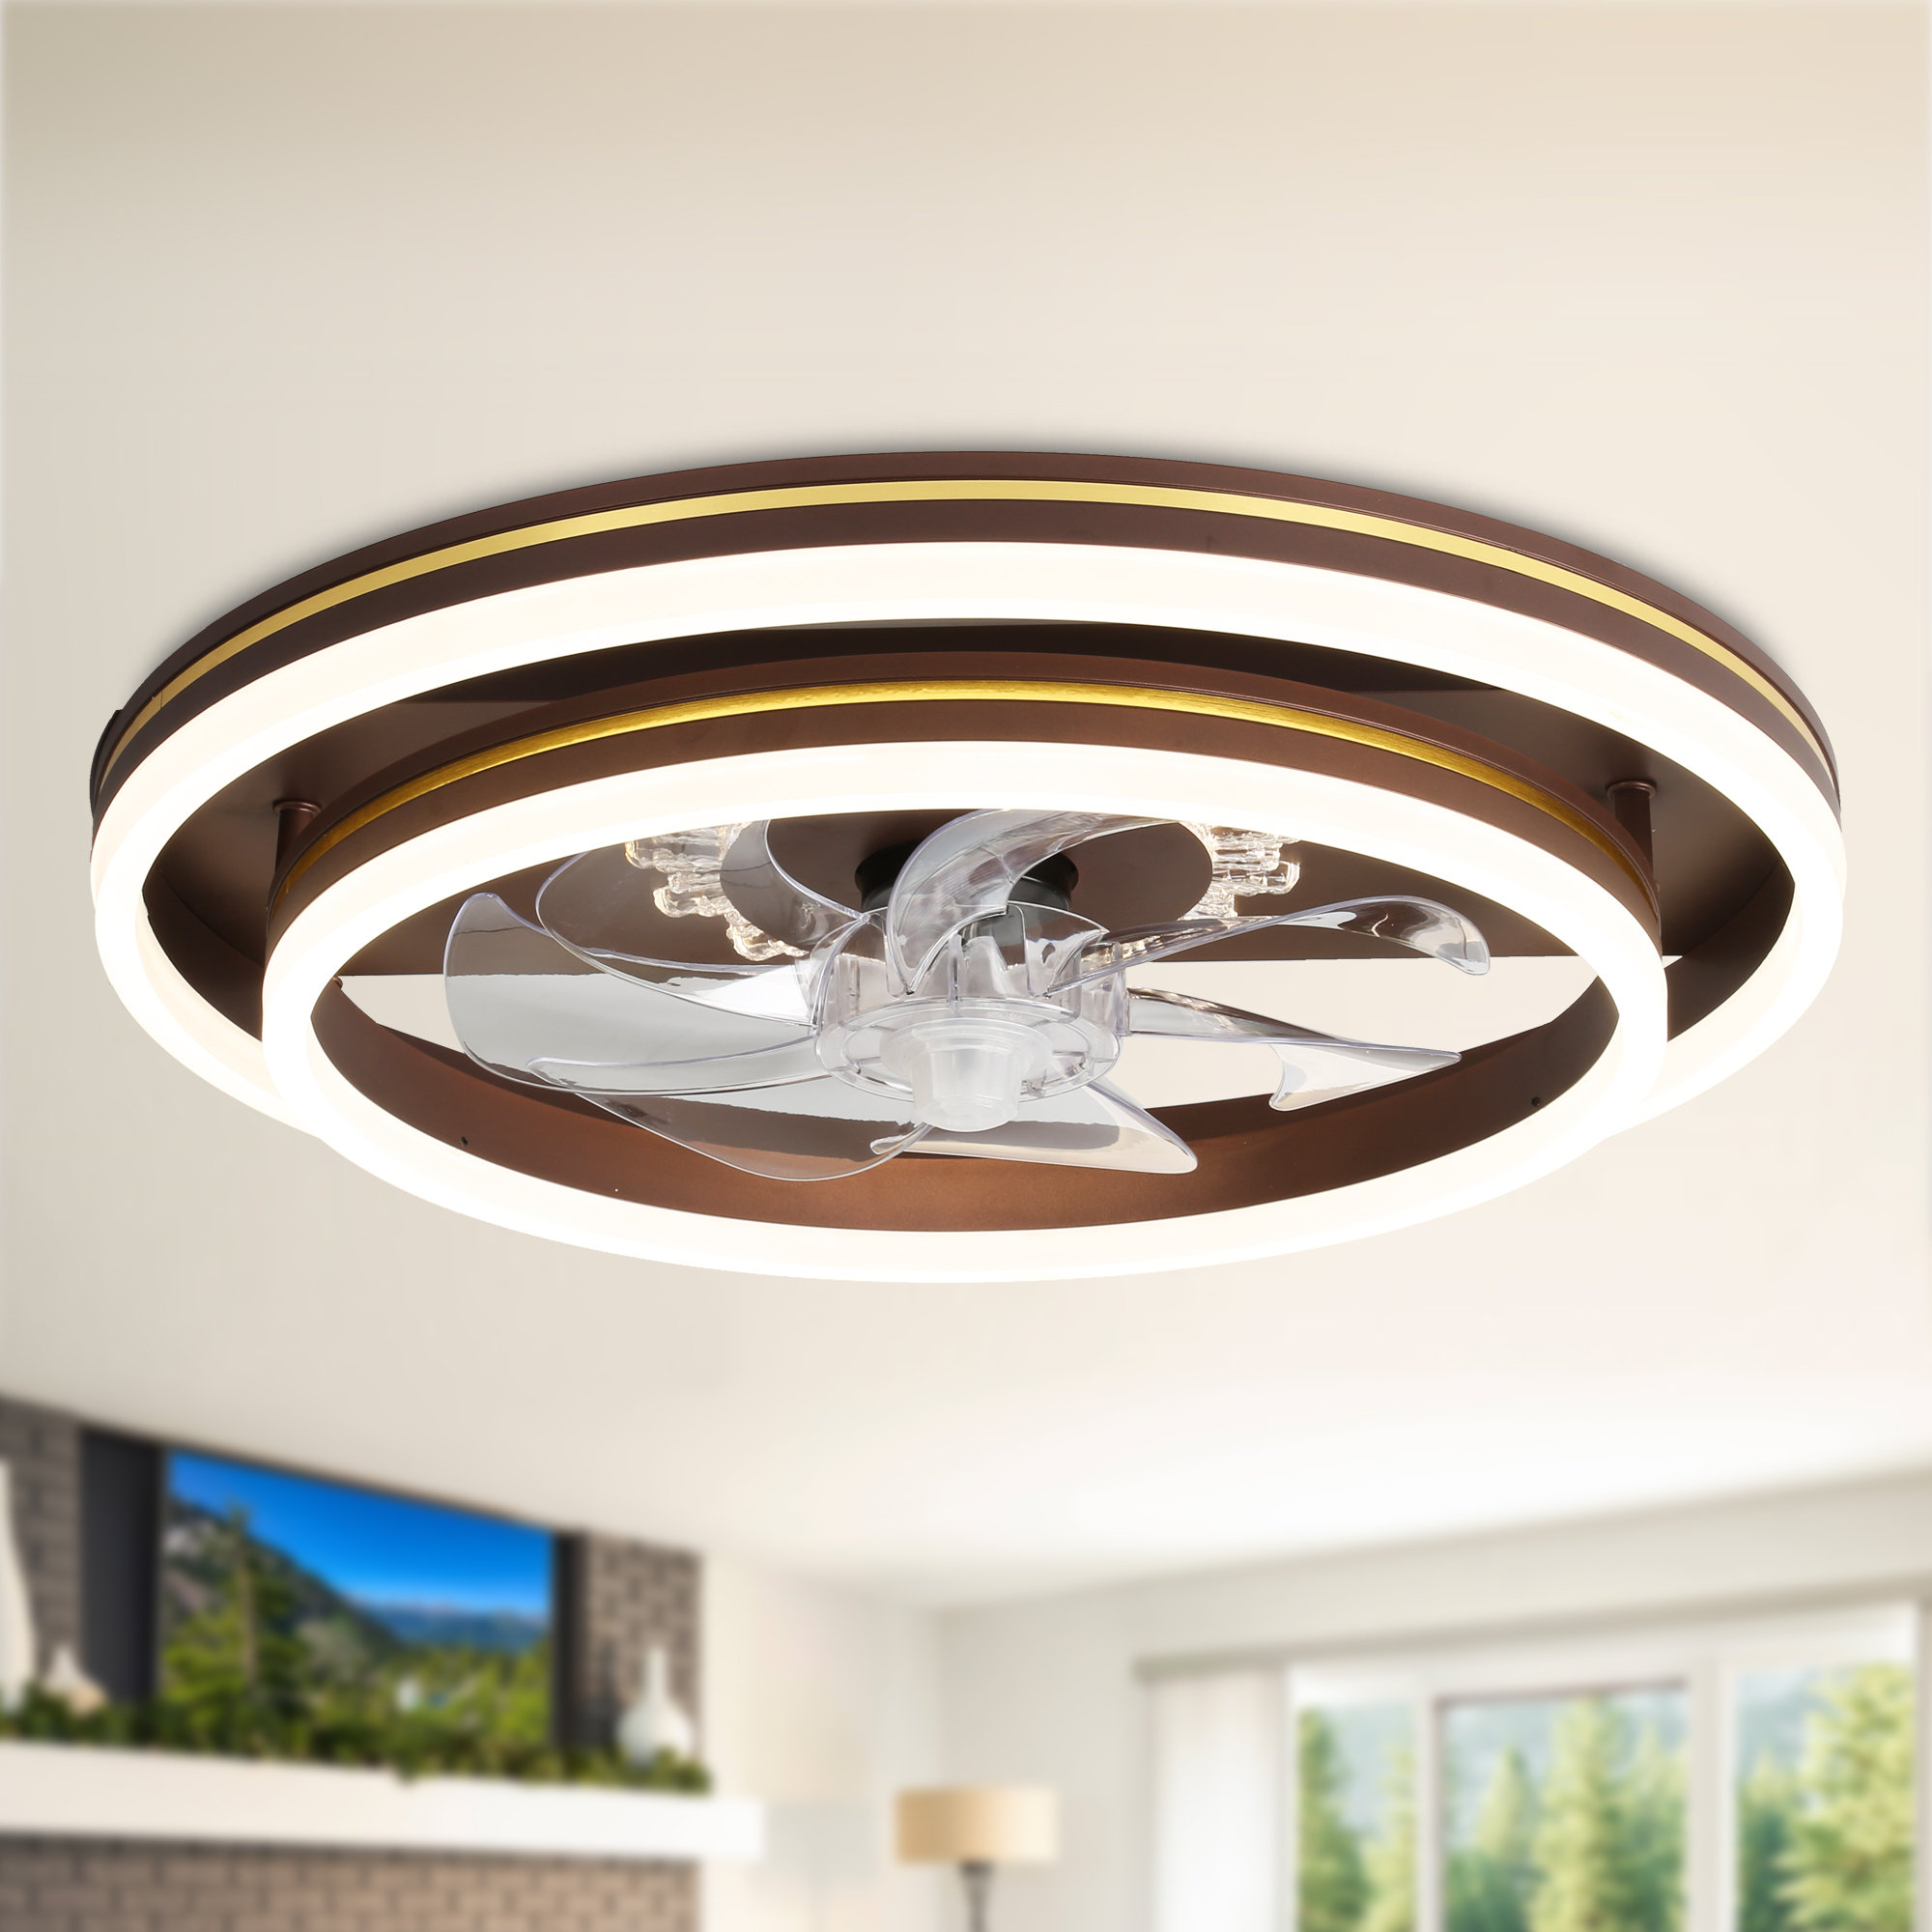 Ceiling Fan with Light,Modern Indoor Flush Mount Ceiling Fan with Dimmable  LED Light and Remote Control 3 Color Temperatures 6 Gear Wind Speed for